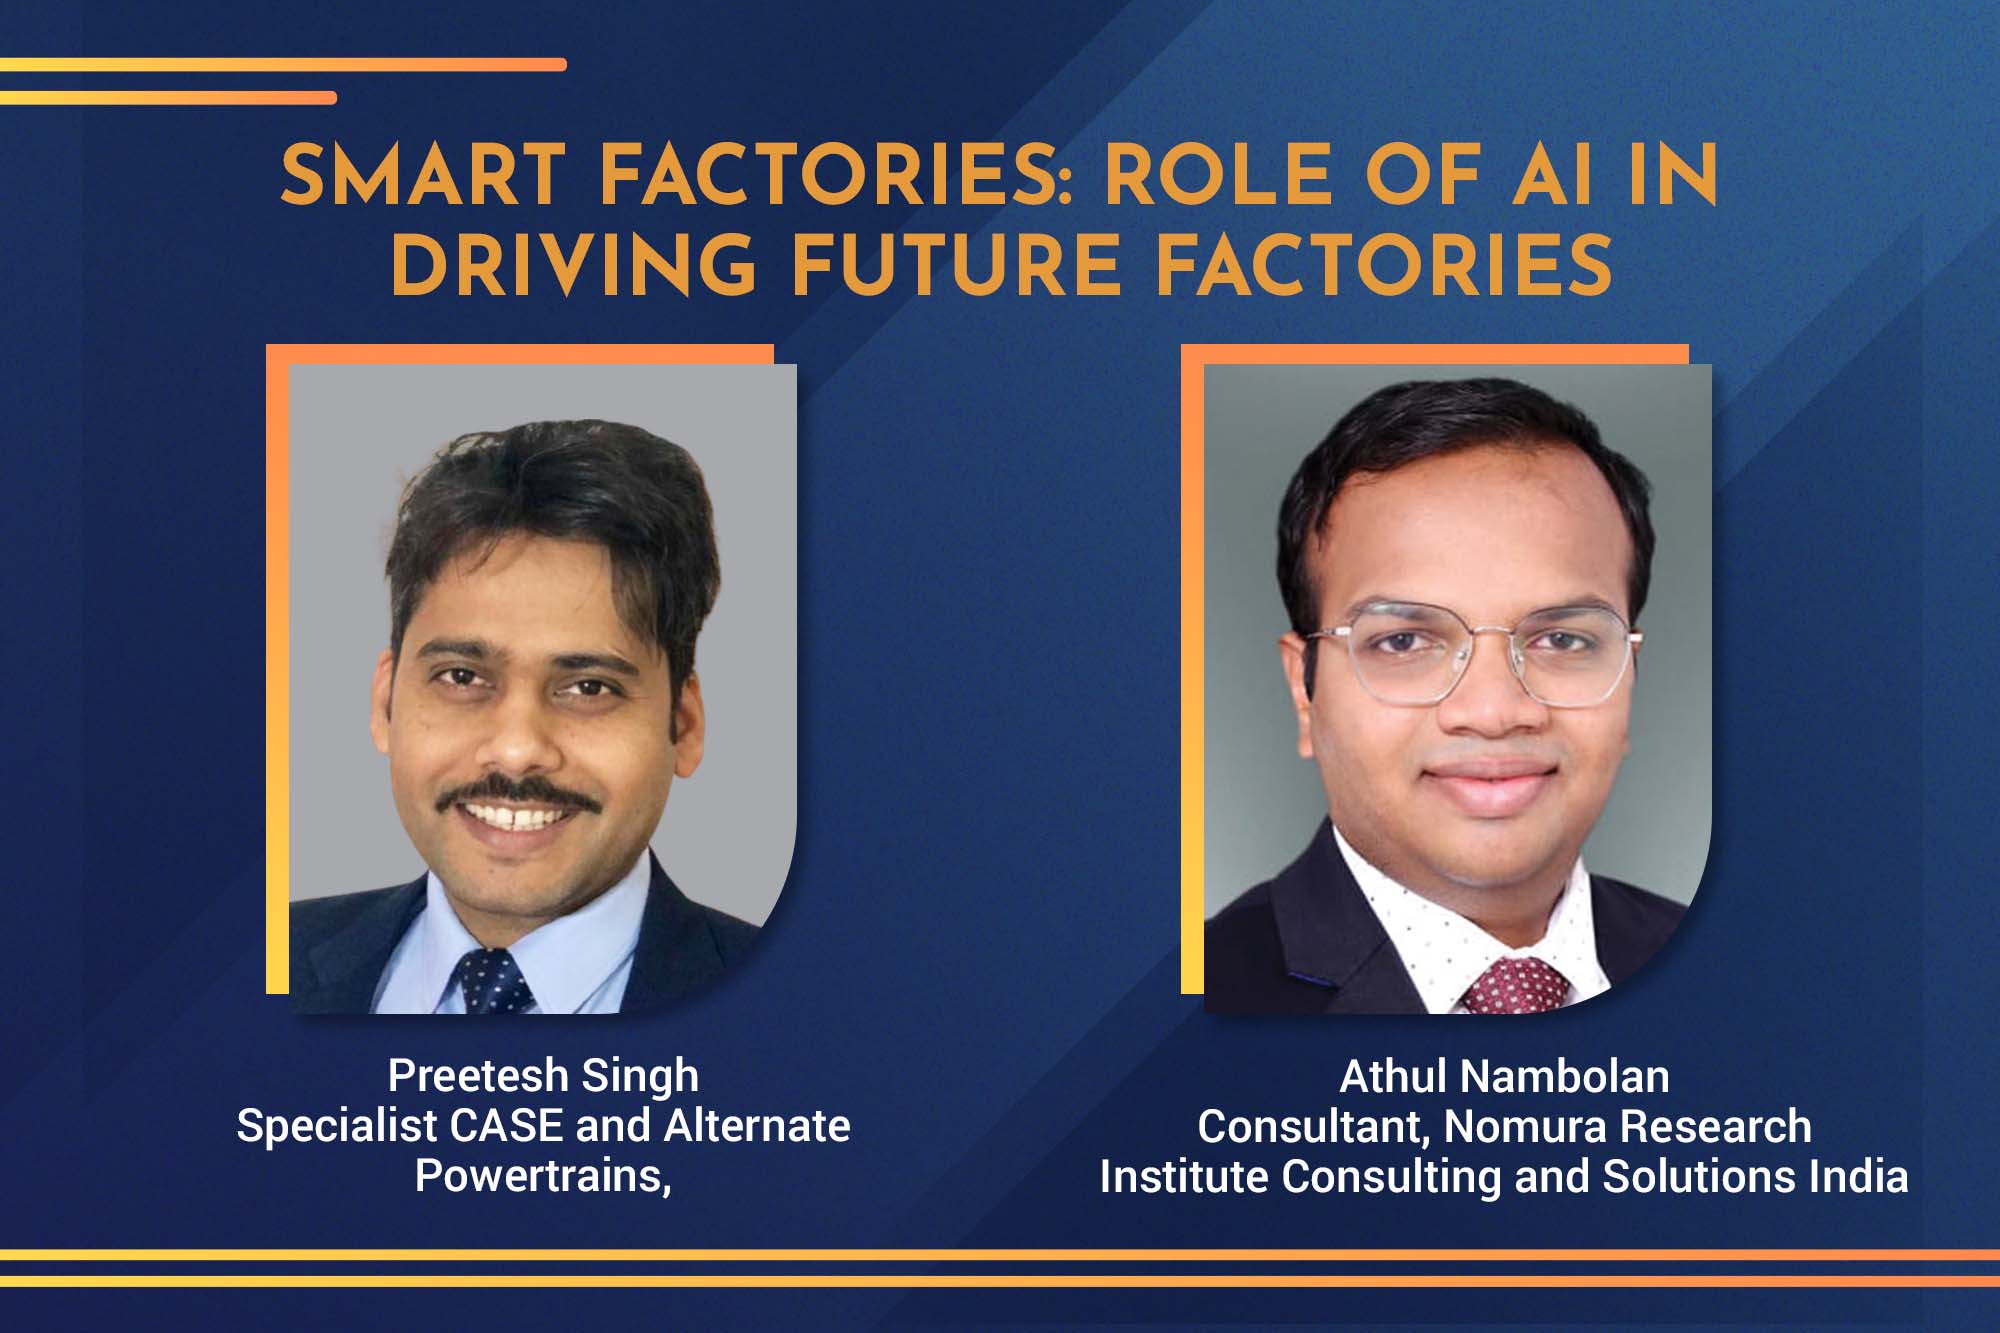 Smart factories: Role of AI in driving future factories